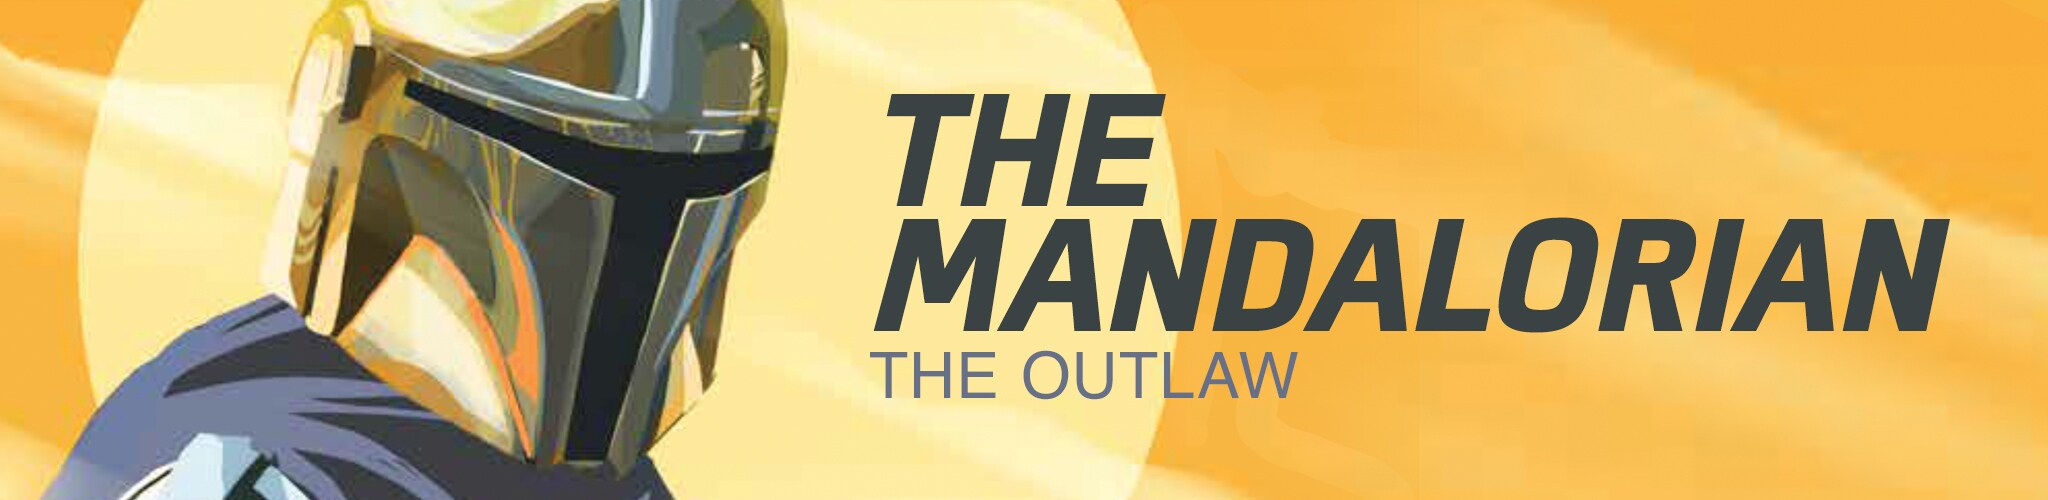 The Mandalorian - The Outlaw